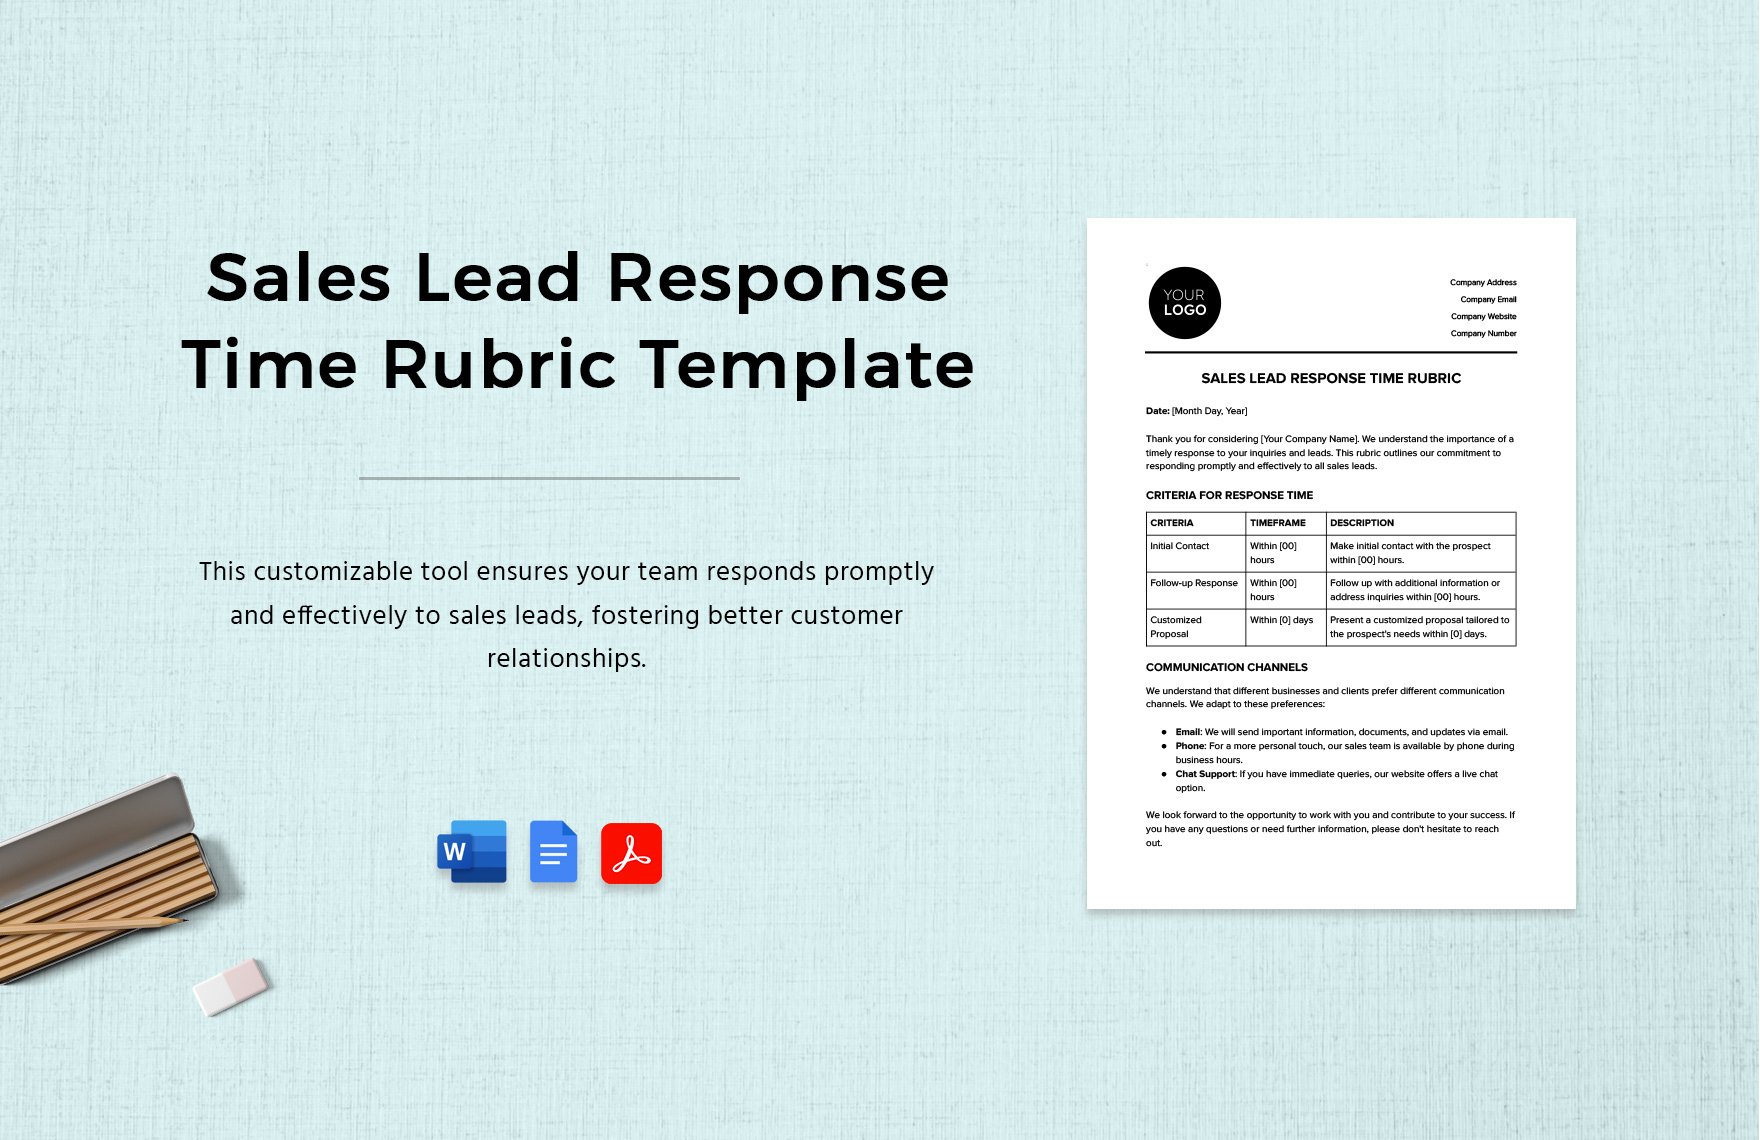 Sales Lead Response Time Rubric Template in Word, Google Docs, PDF